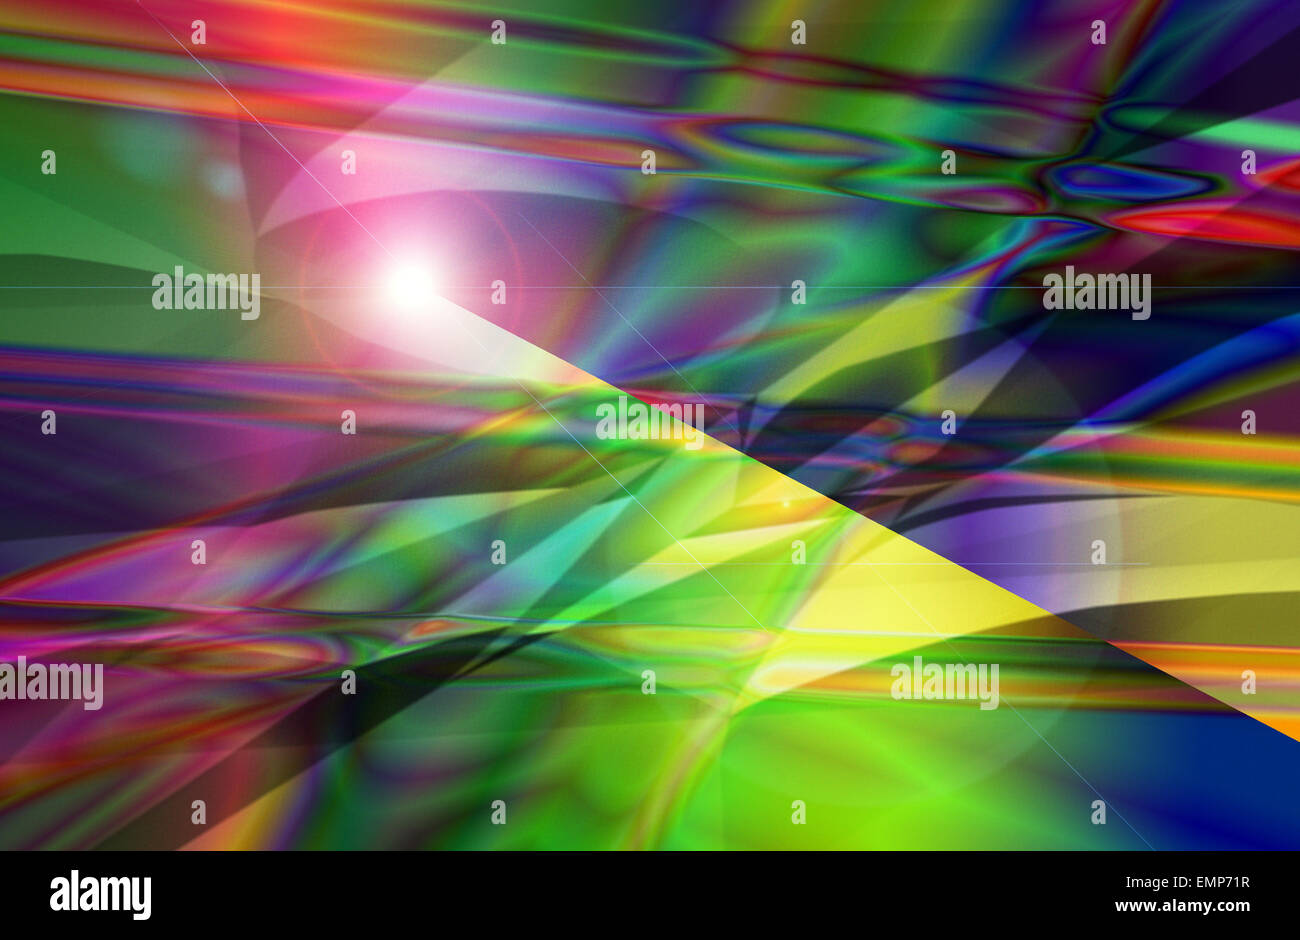 The Colorful Abstract and Background Texture Pattern with Sun Flare. Stock Photo